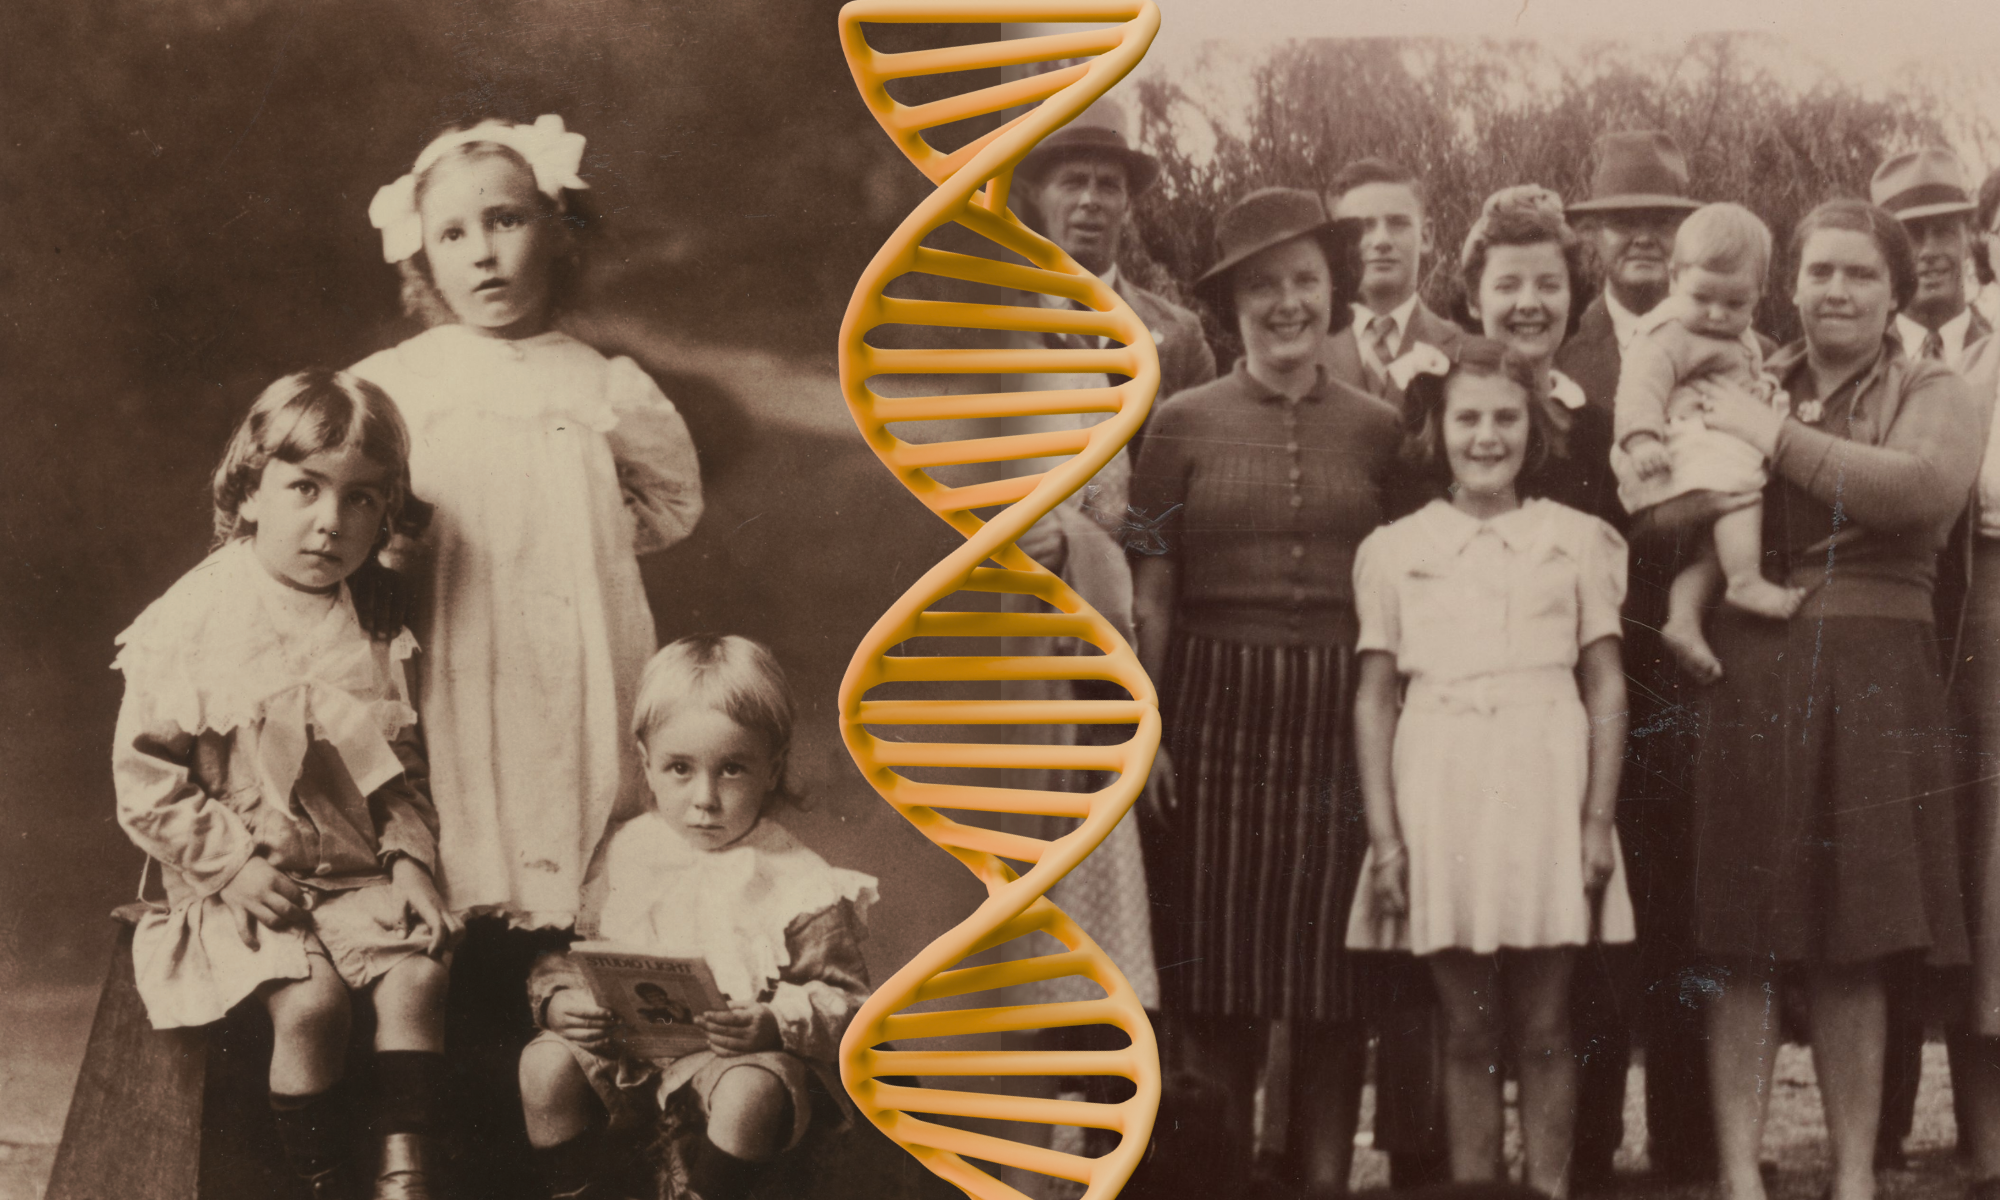 Images of the Moule Family, four decades apart, with a strand of DNA between them